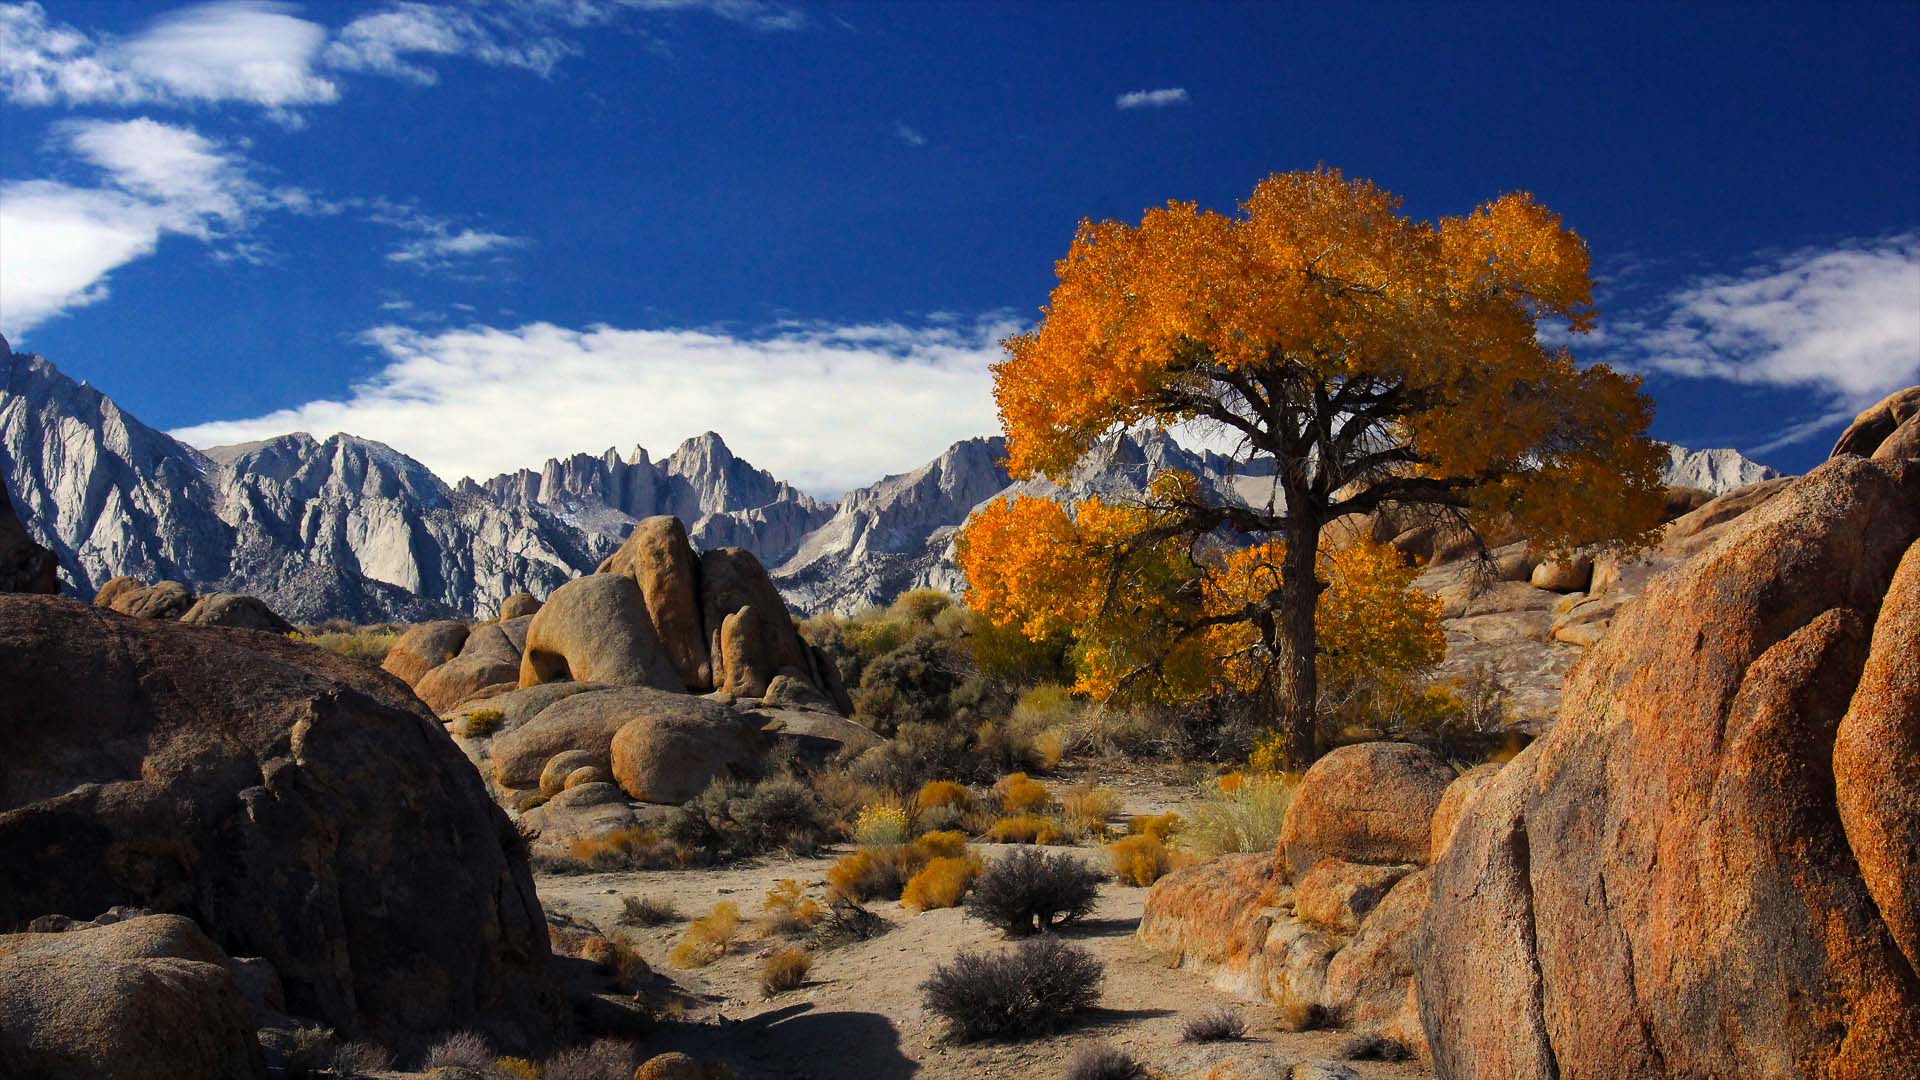 Autumn In Alabama Hills With Mount Whitney The Highest Peak In The